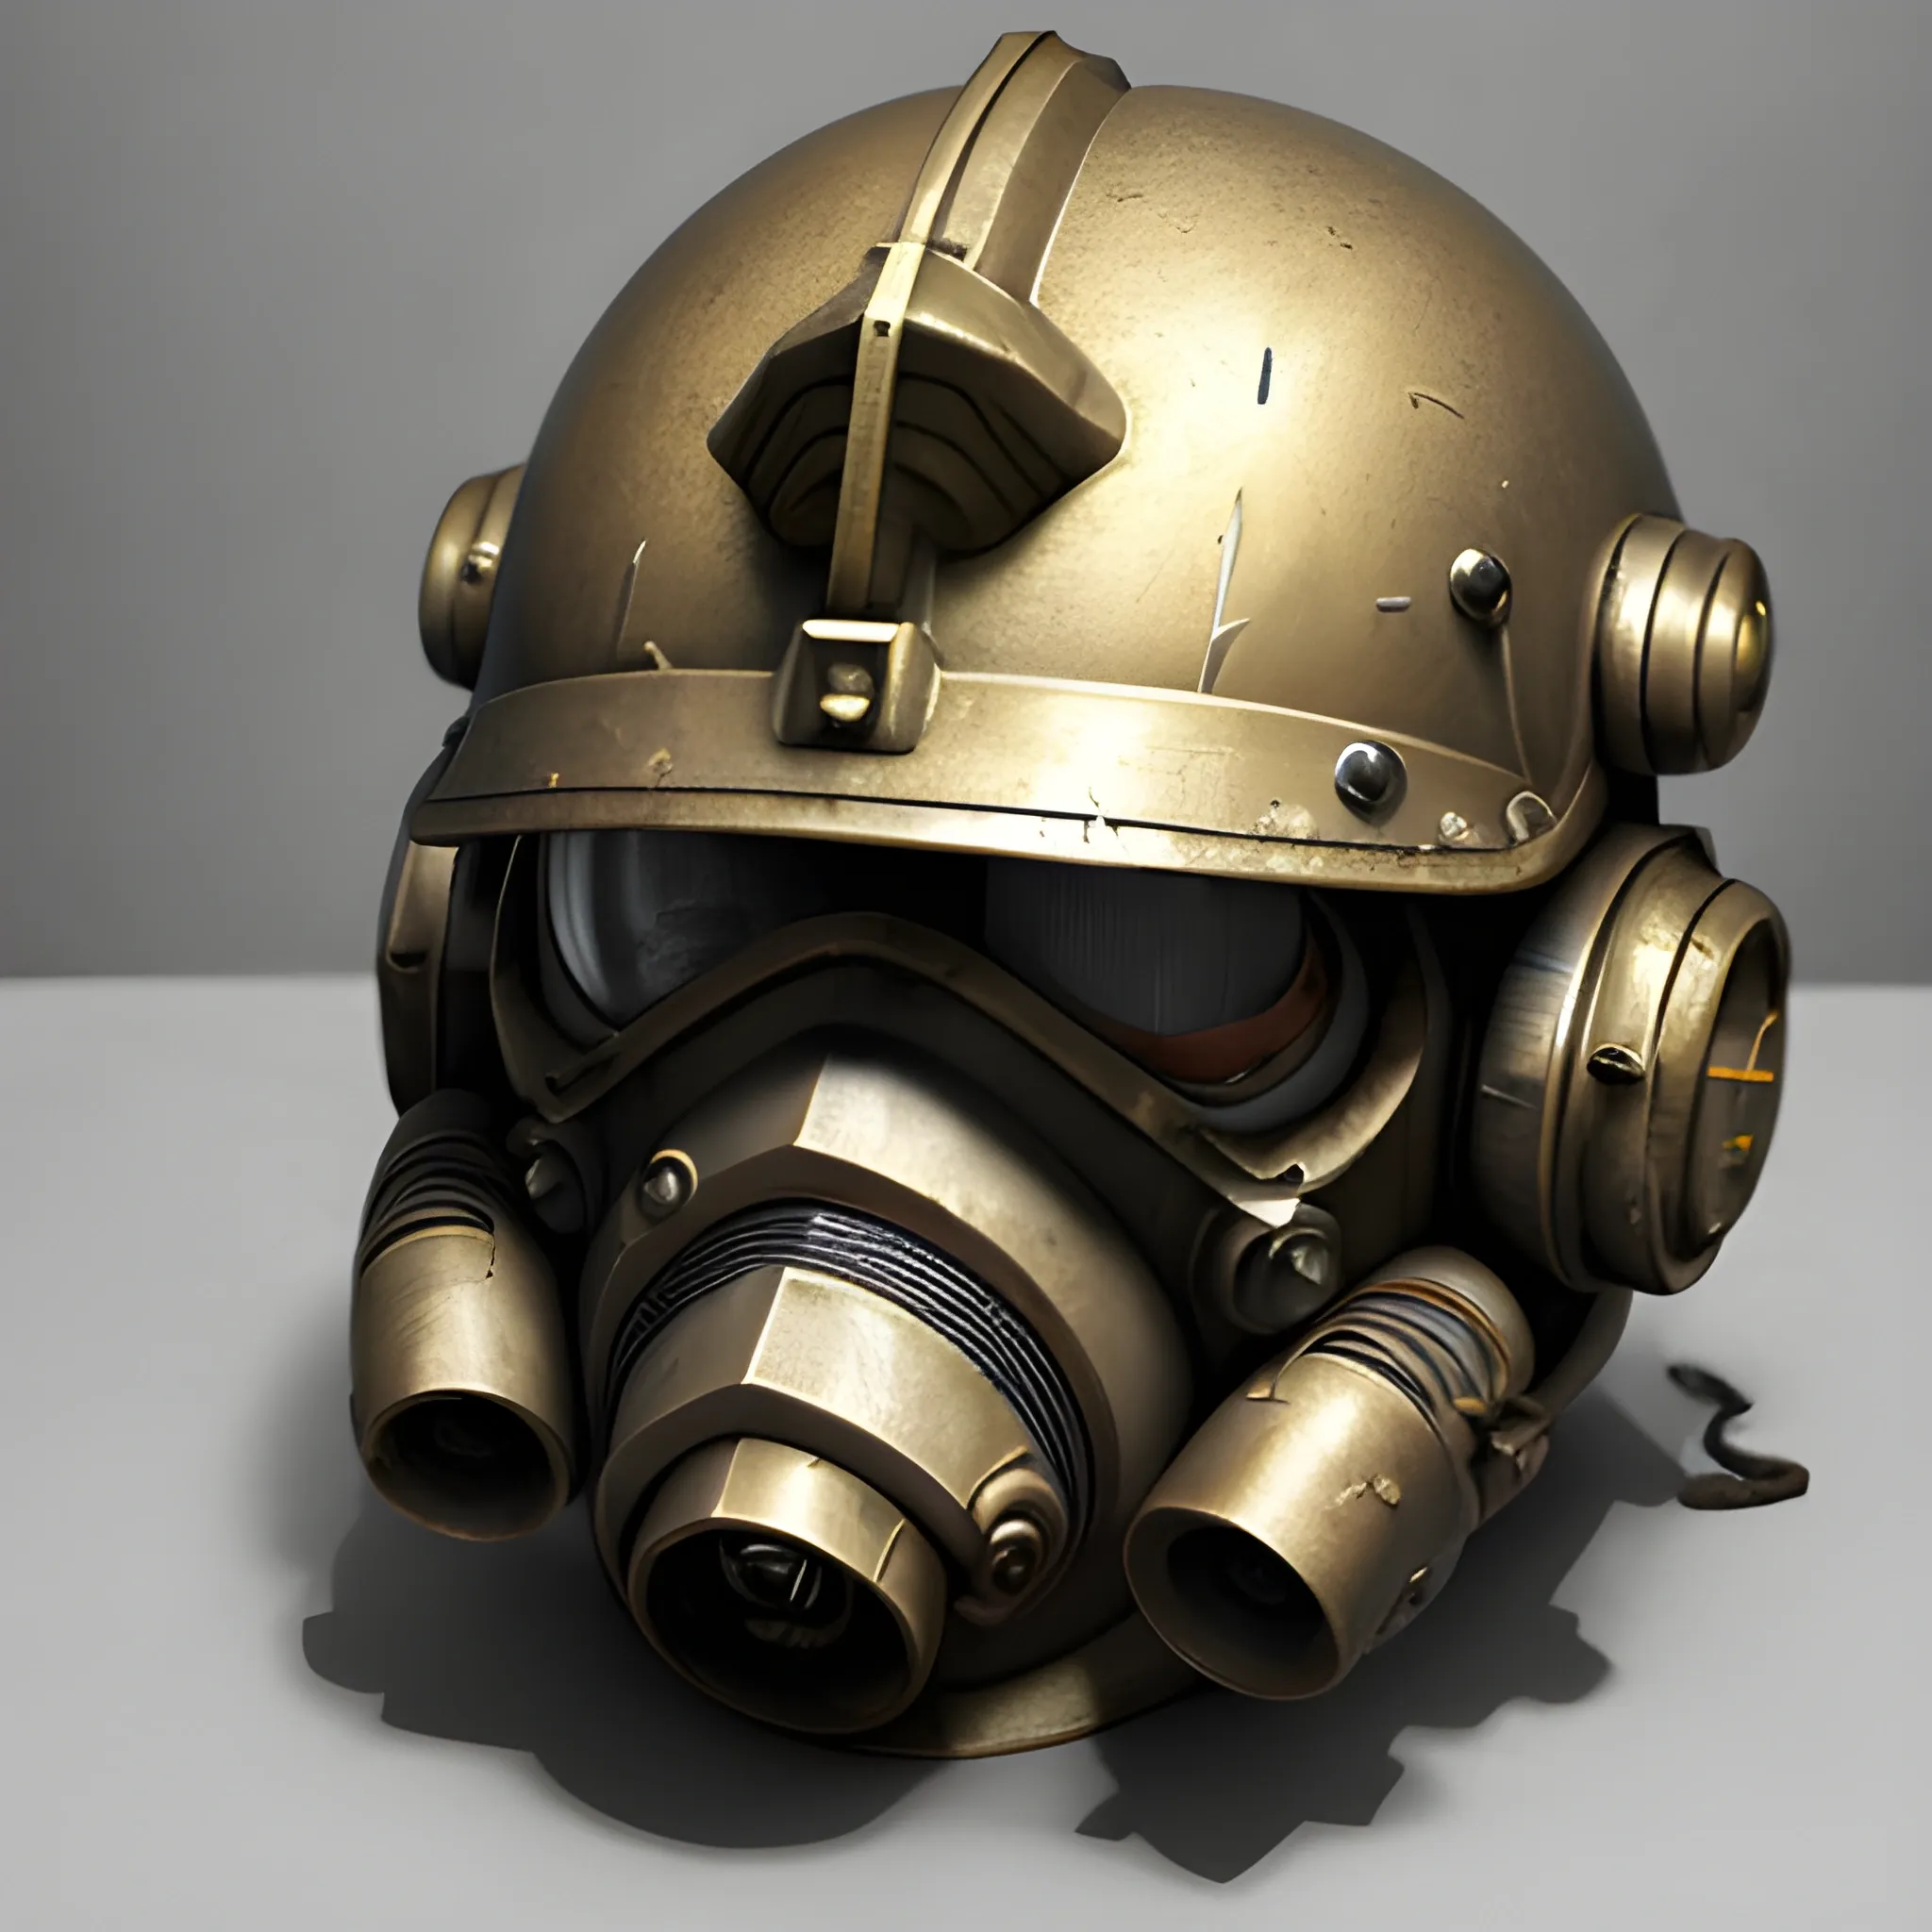 in the style of Fallout 4 masterpiece, warhemmer 40k's Peturabo as a Brotherhood of Steel paladin helmet off